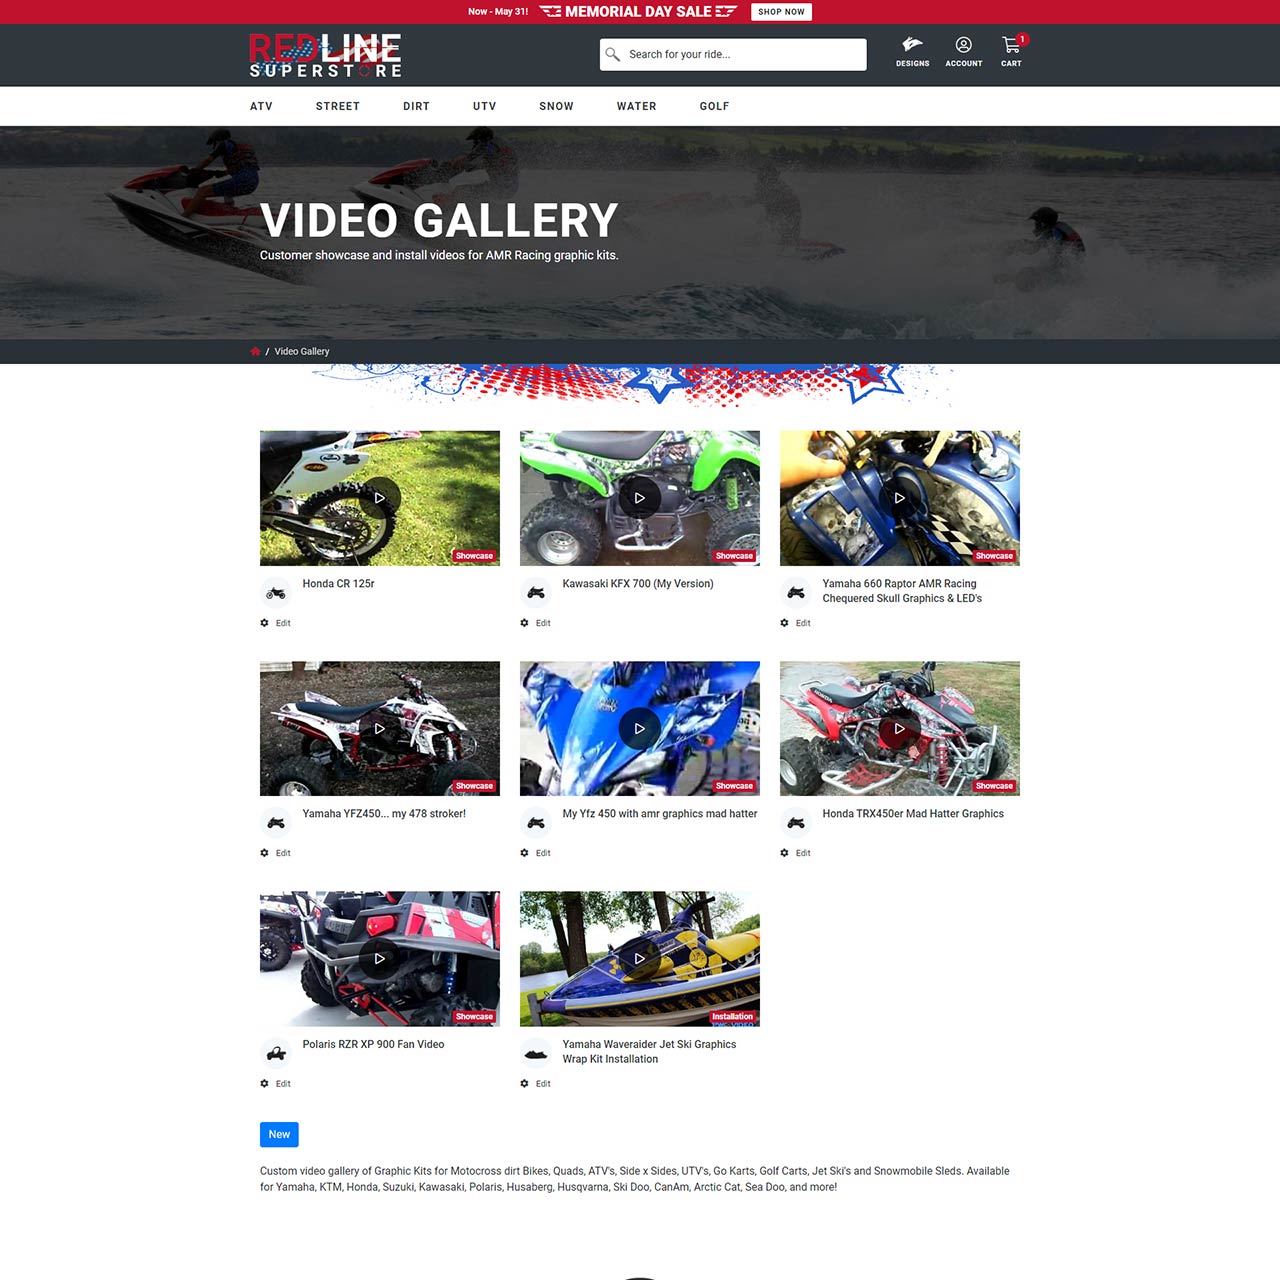 Video Gallery Page (YouTube Videos)